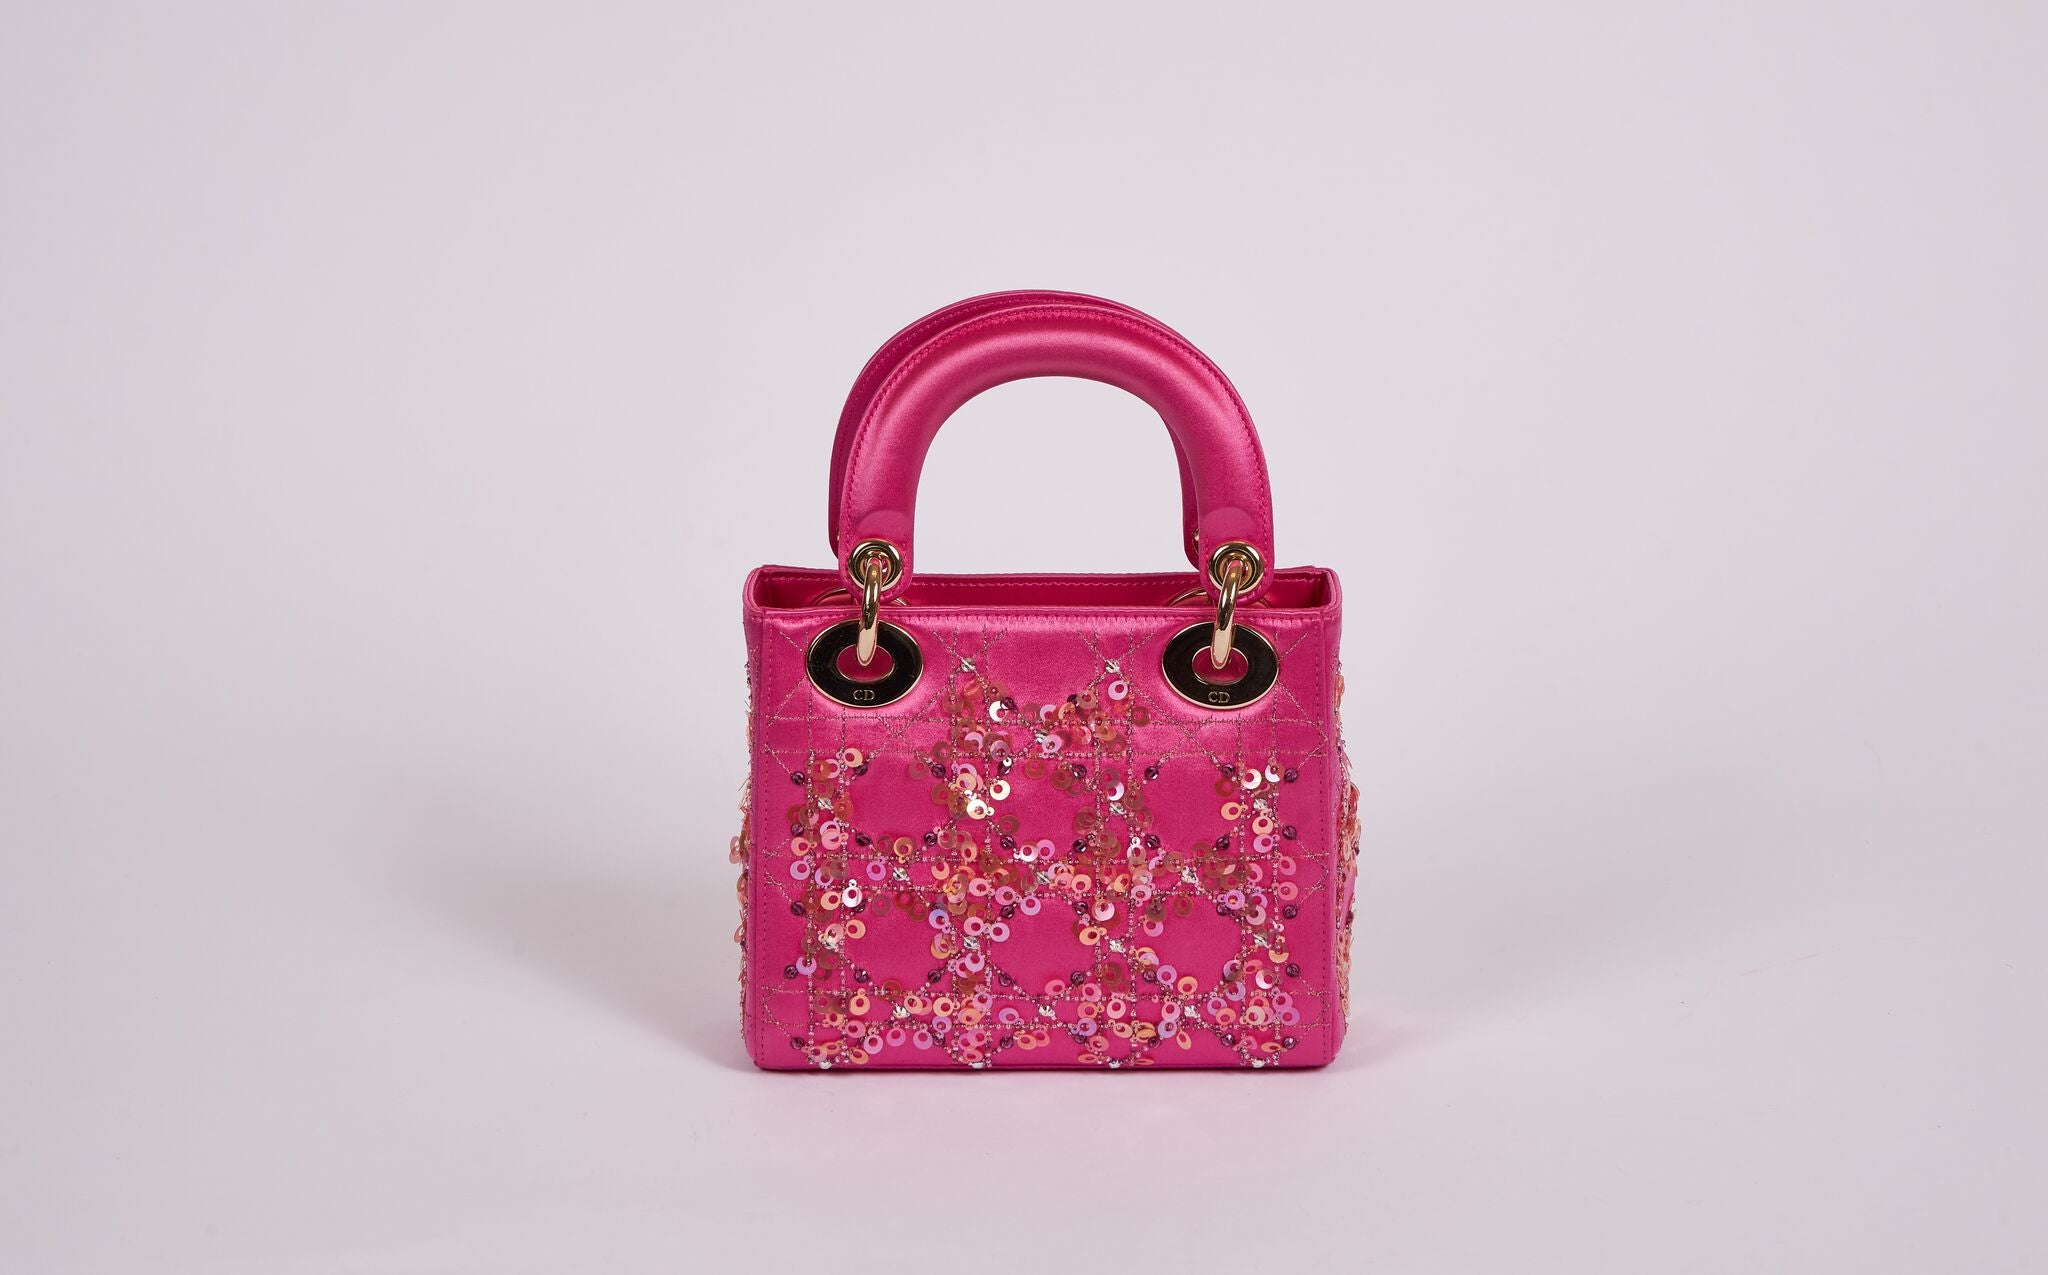  Lady Dior Mini in Fuchsia Pink Luxury Bags  Wallets on Carousell